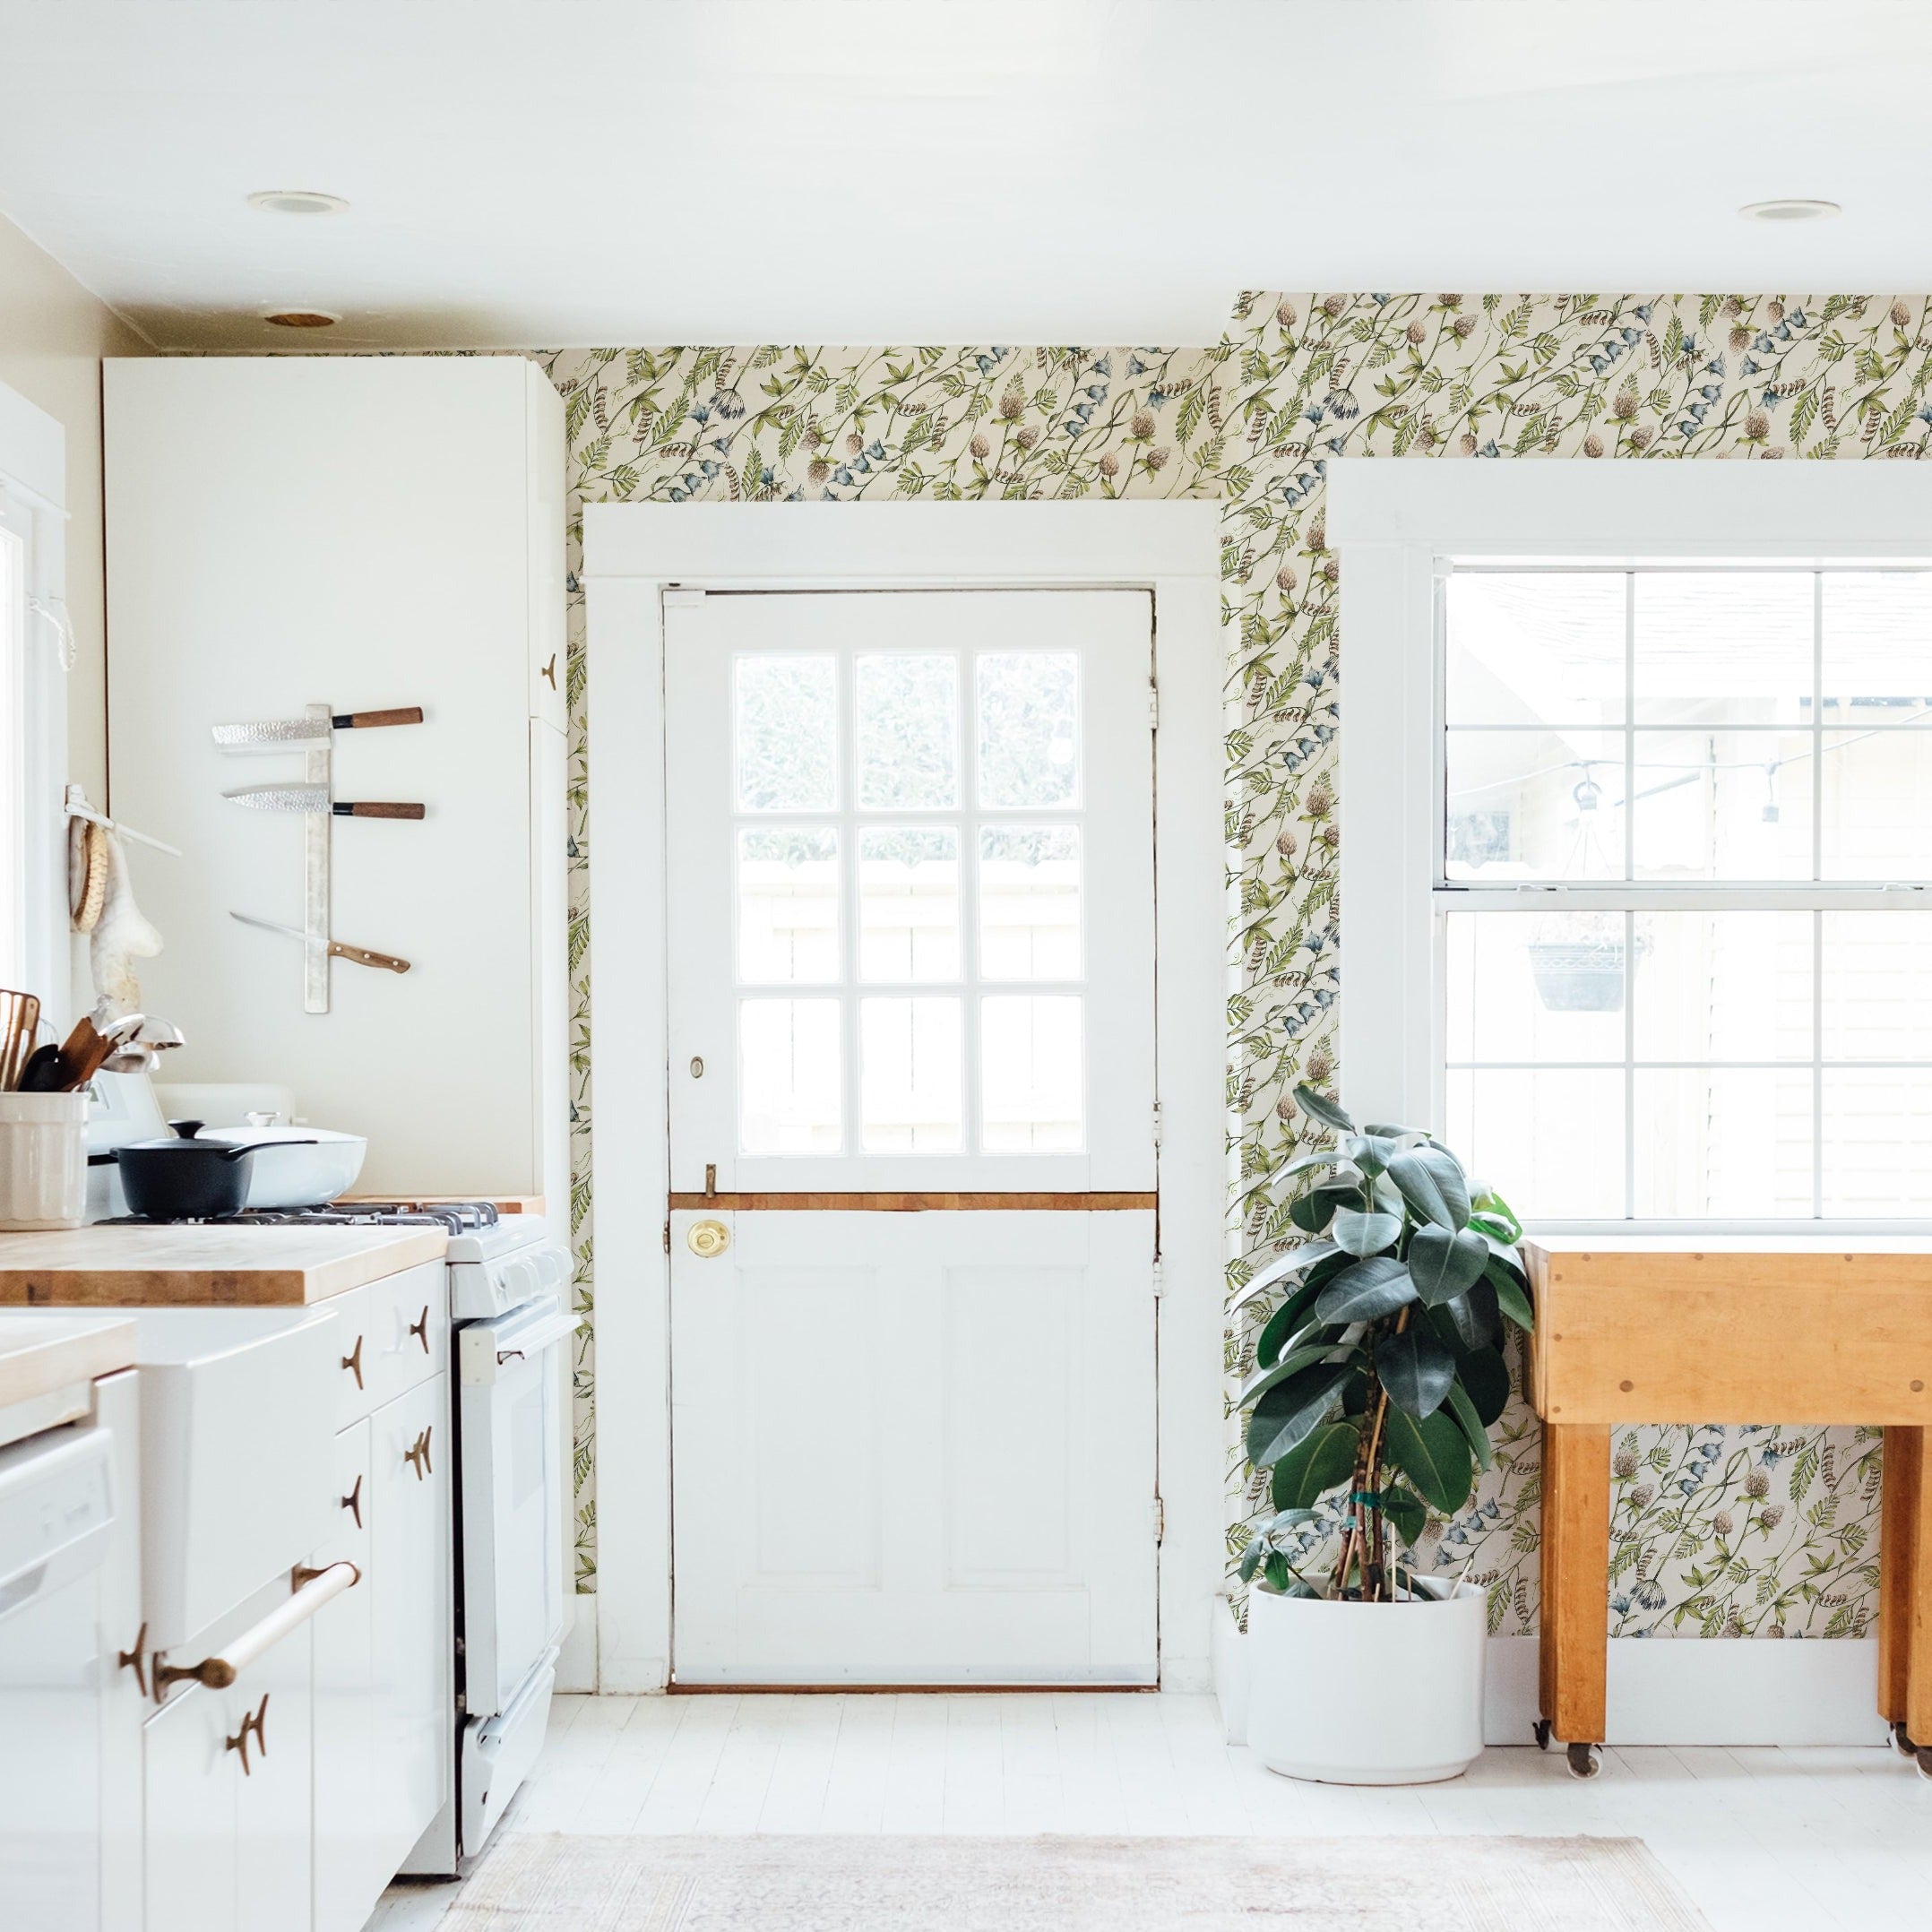 A cozy kitchen interior with a rustic charm, where the 'Watercolour Botanical Wildflowers' wallpaper adds a vibrant touch to the walls. The pattern is full of delicate floral illustrations that bring an organic and serene feel to the space. Natural light streams through a window, enhancing the room's homey atmosphere.